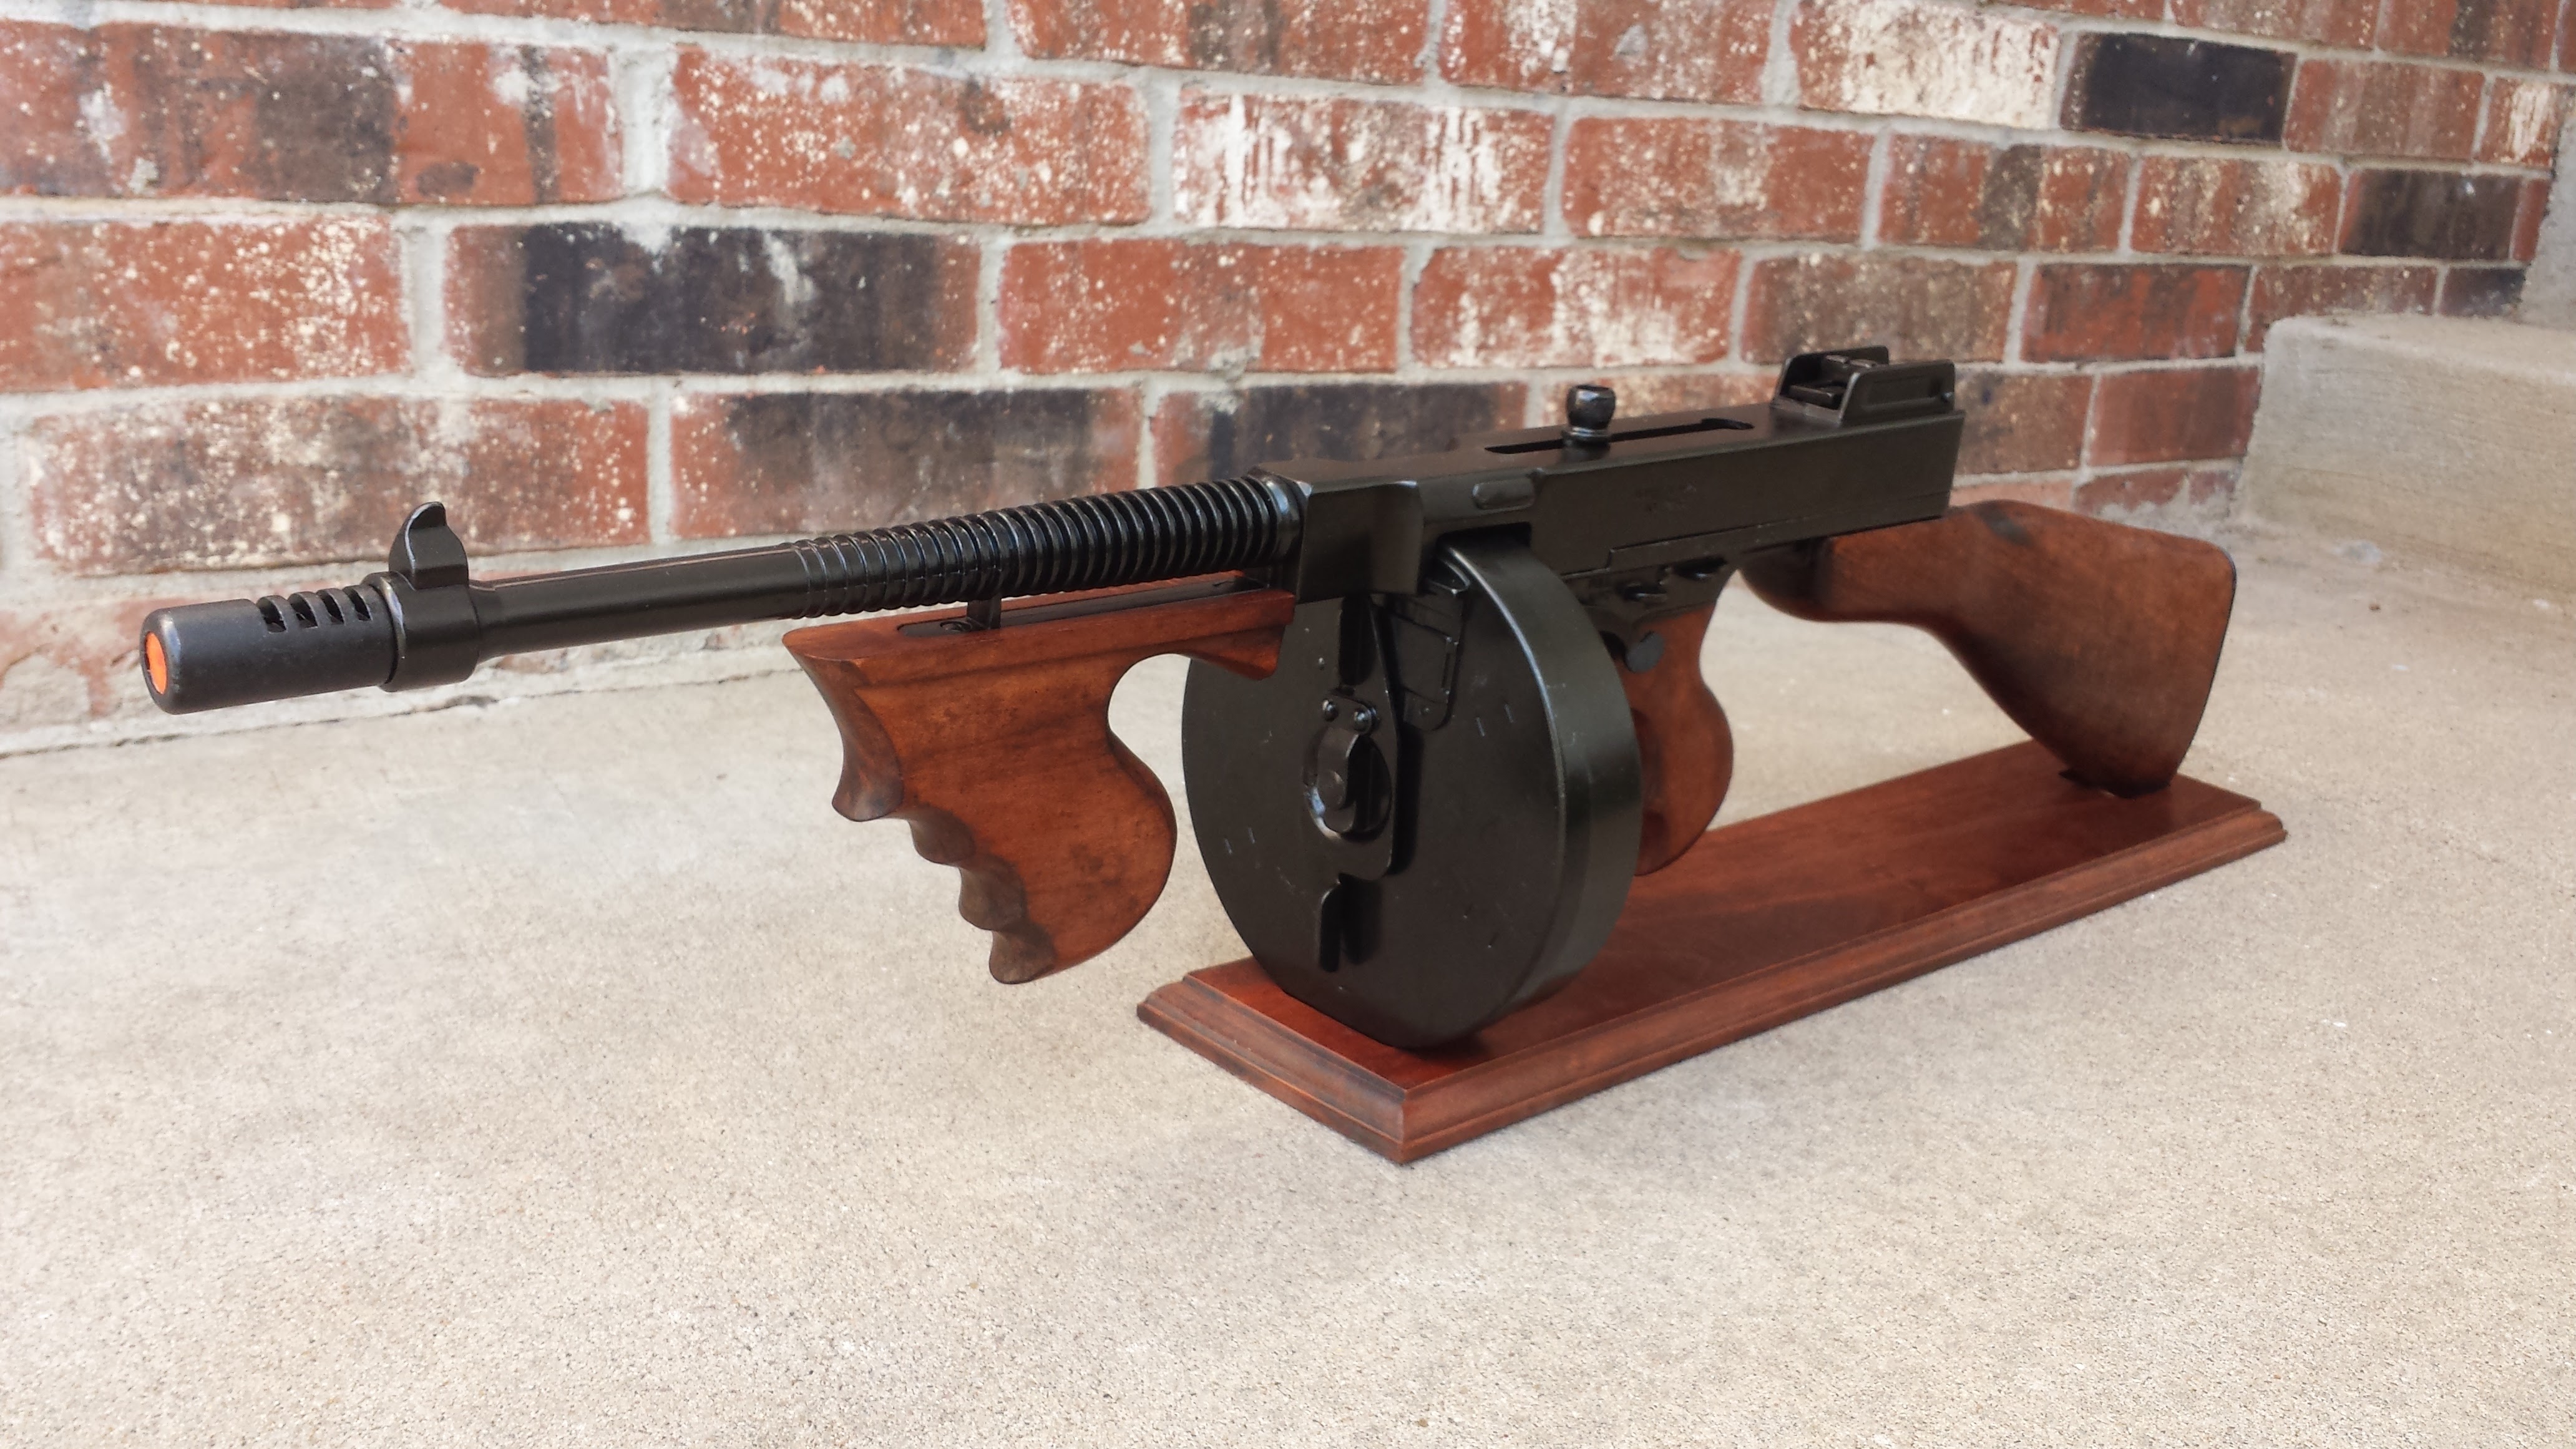 Display Stand for Gangster Tommy Gun Replica